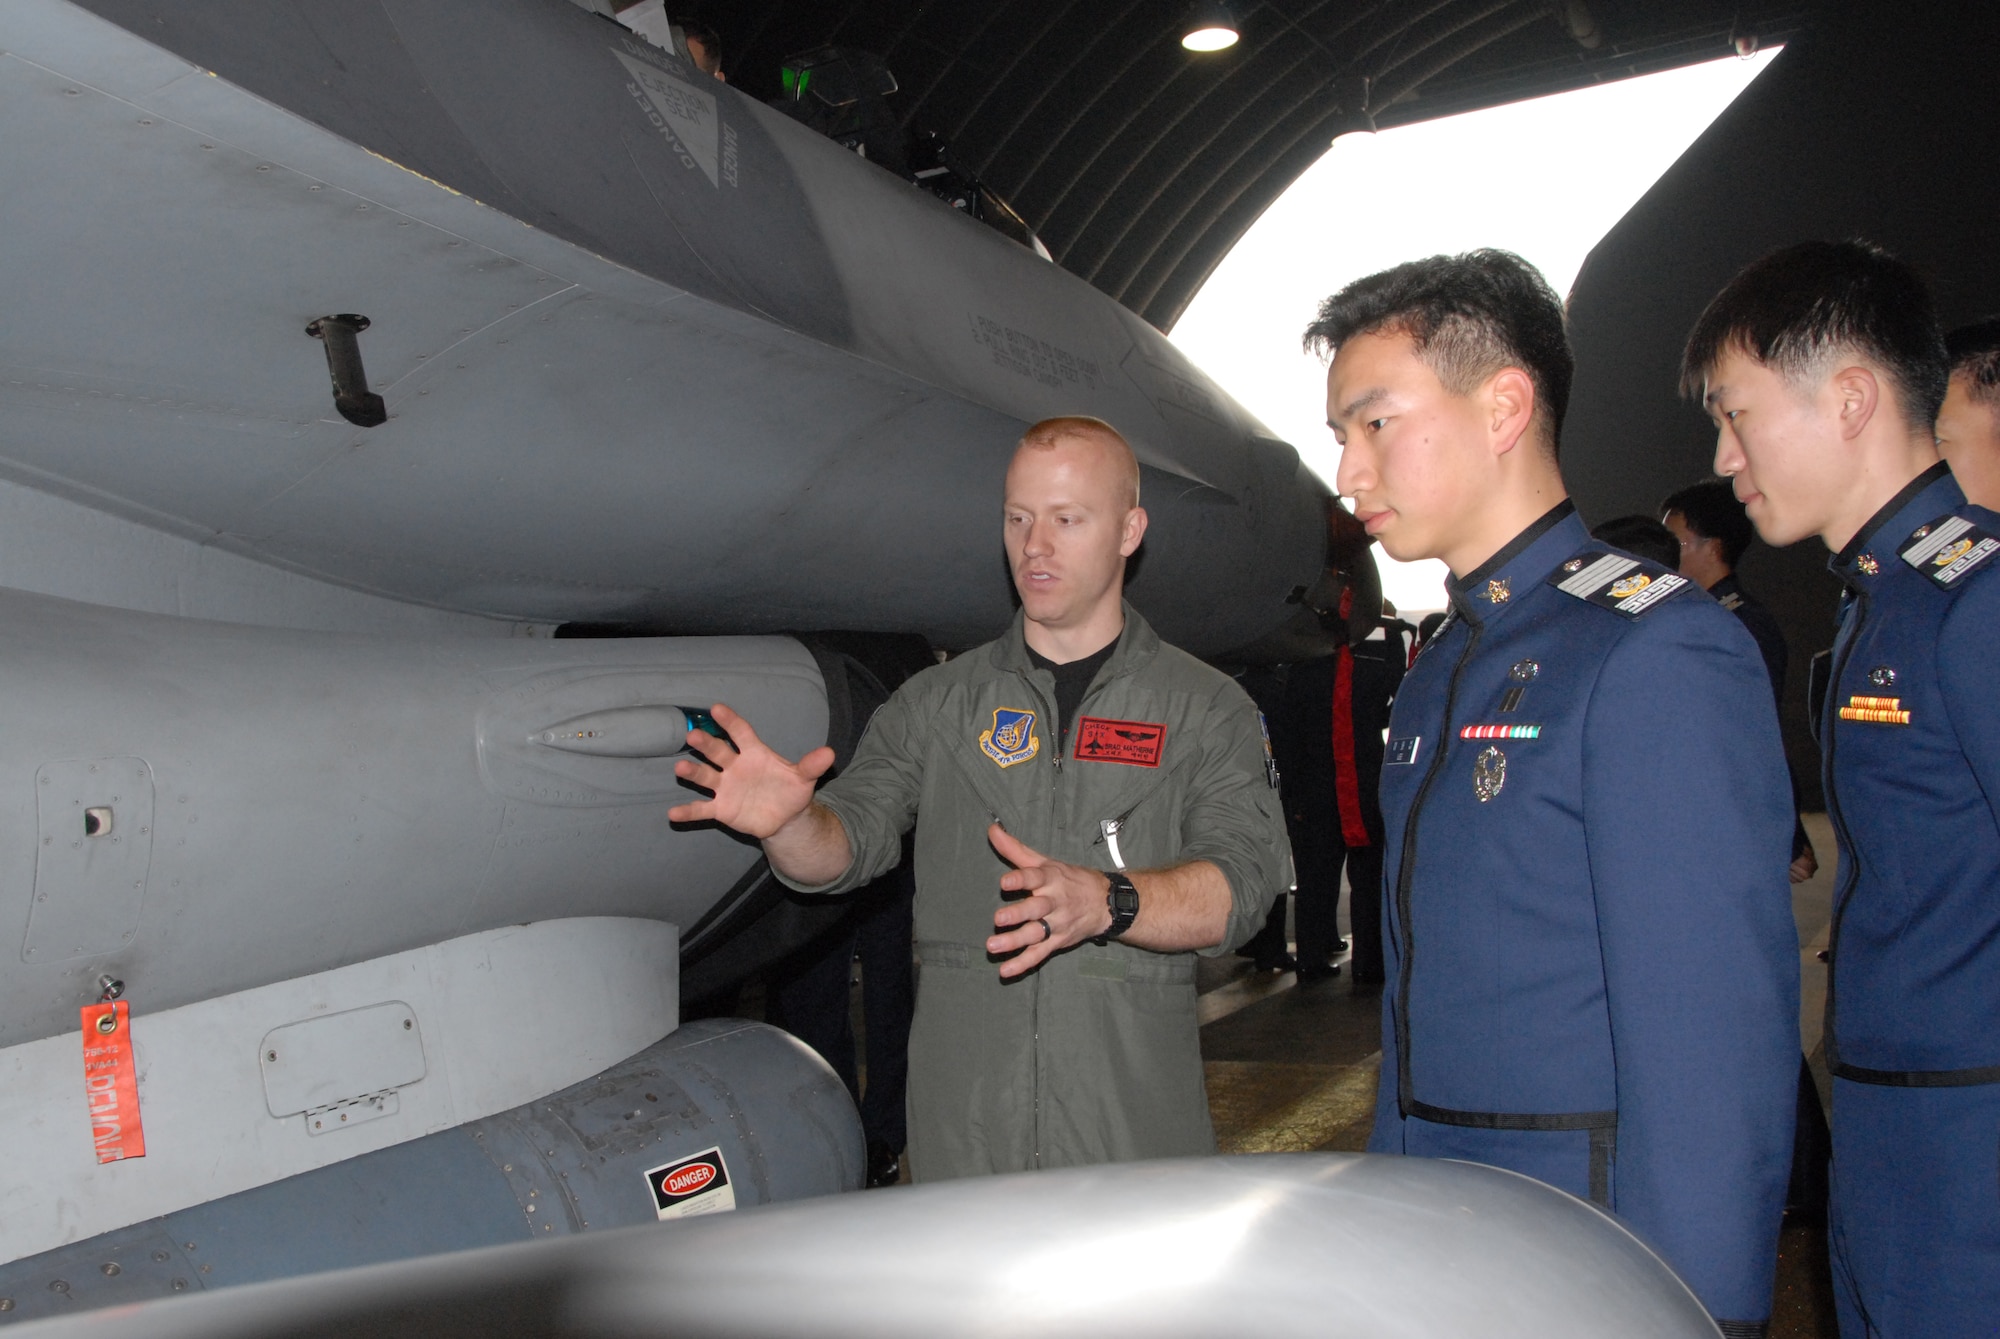 OSAN AIR BASE, Republic of Korea -- First Lt. Brad Matherne, a 36th Fighter Squadron pilot, talks to two cadets from the Republic of Korea Air Force Academy Wednesday. While they were visiting Osan, they saw the 5th Reconnaissance Squadron, 36th FS and 35th Air Defense Artillery patriot batteries. (U.S. Air Force photo by Senior Airman Eunique Stevens)